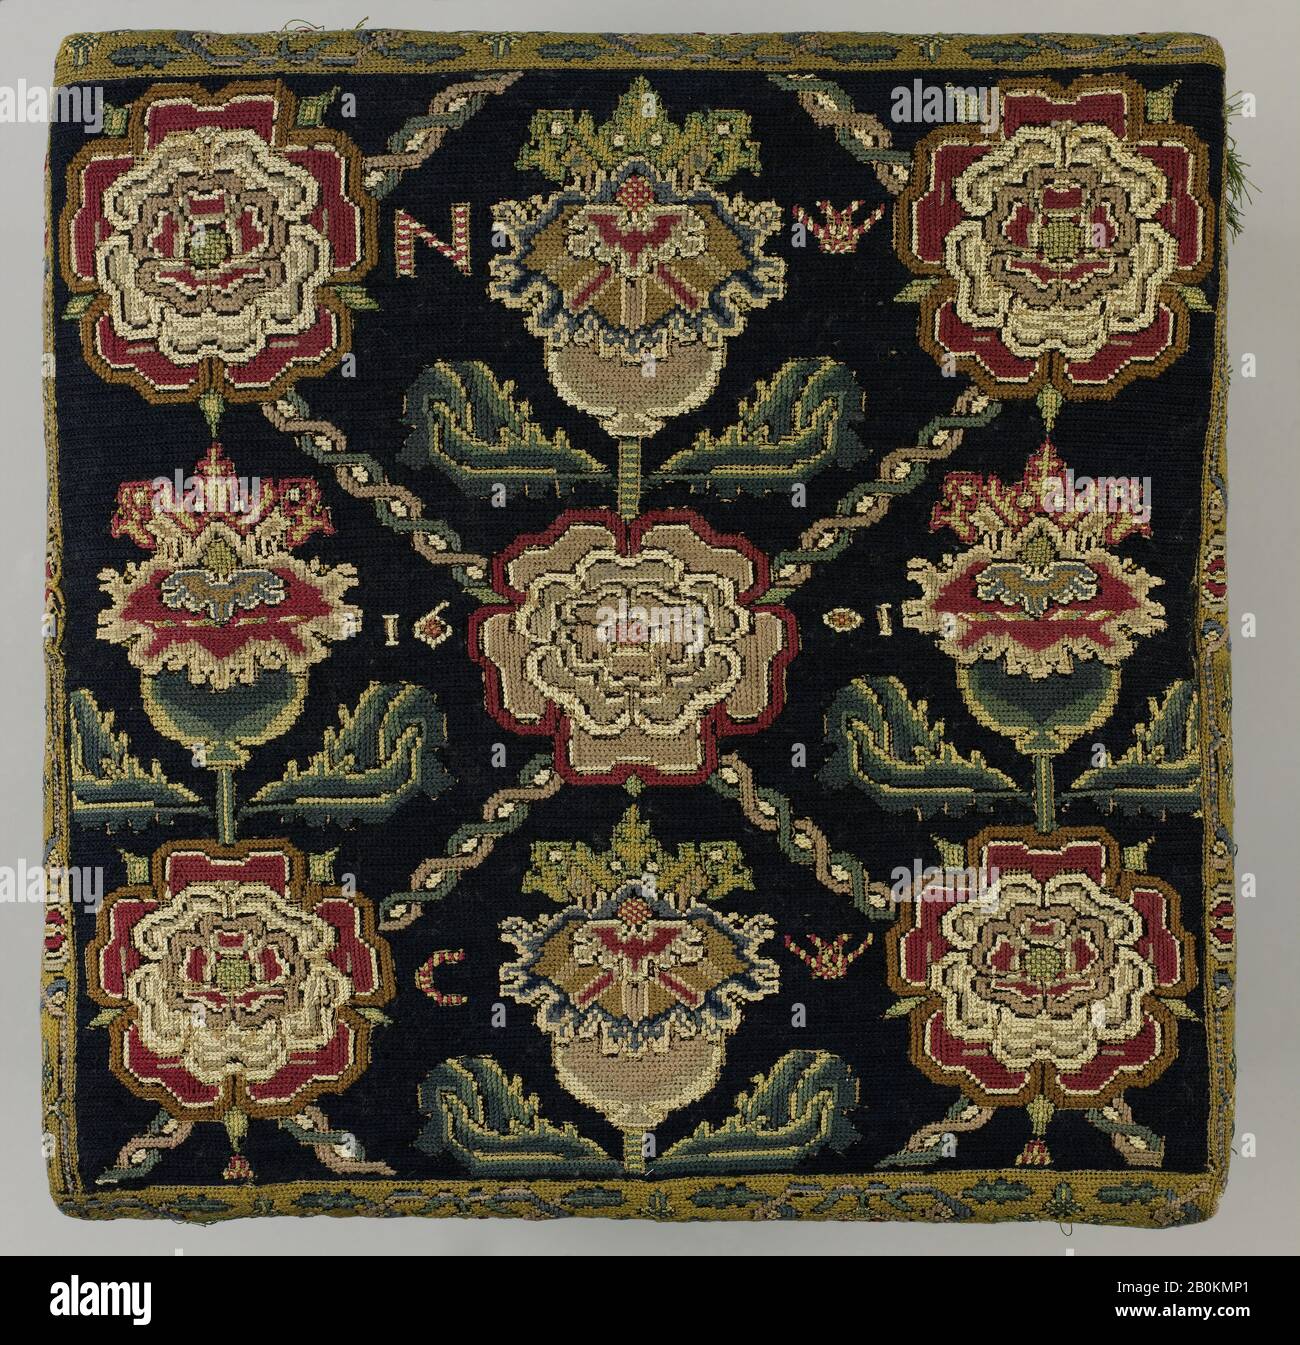 Cushion cover, British, 1601, British, Canvas embroidered with wool and silk thread; cross and long-armed cross stitches, H. 18 x W. 19 inches (45.7 x 48.3 cm), Textiles-Embroidered Stock Photo